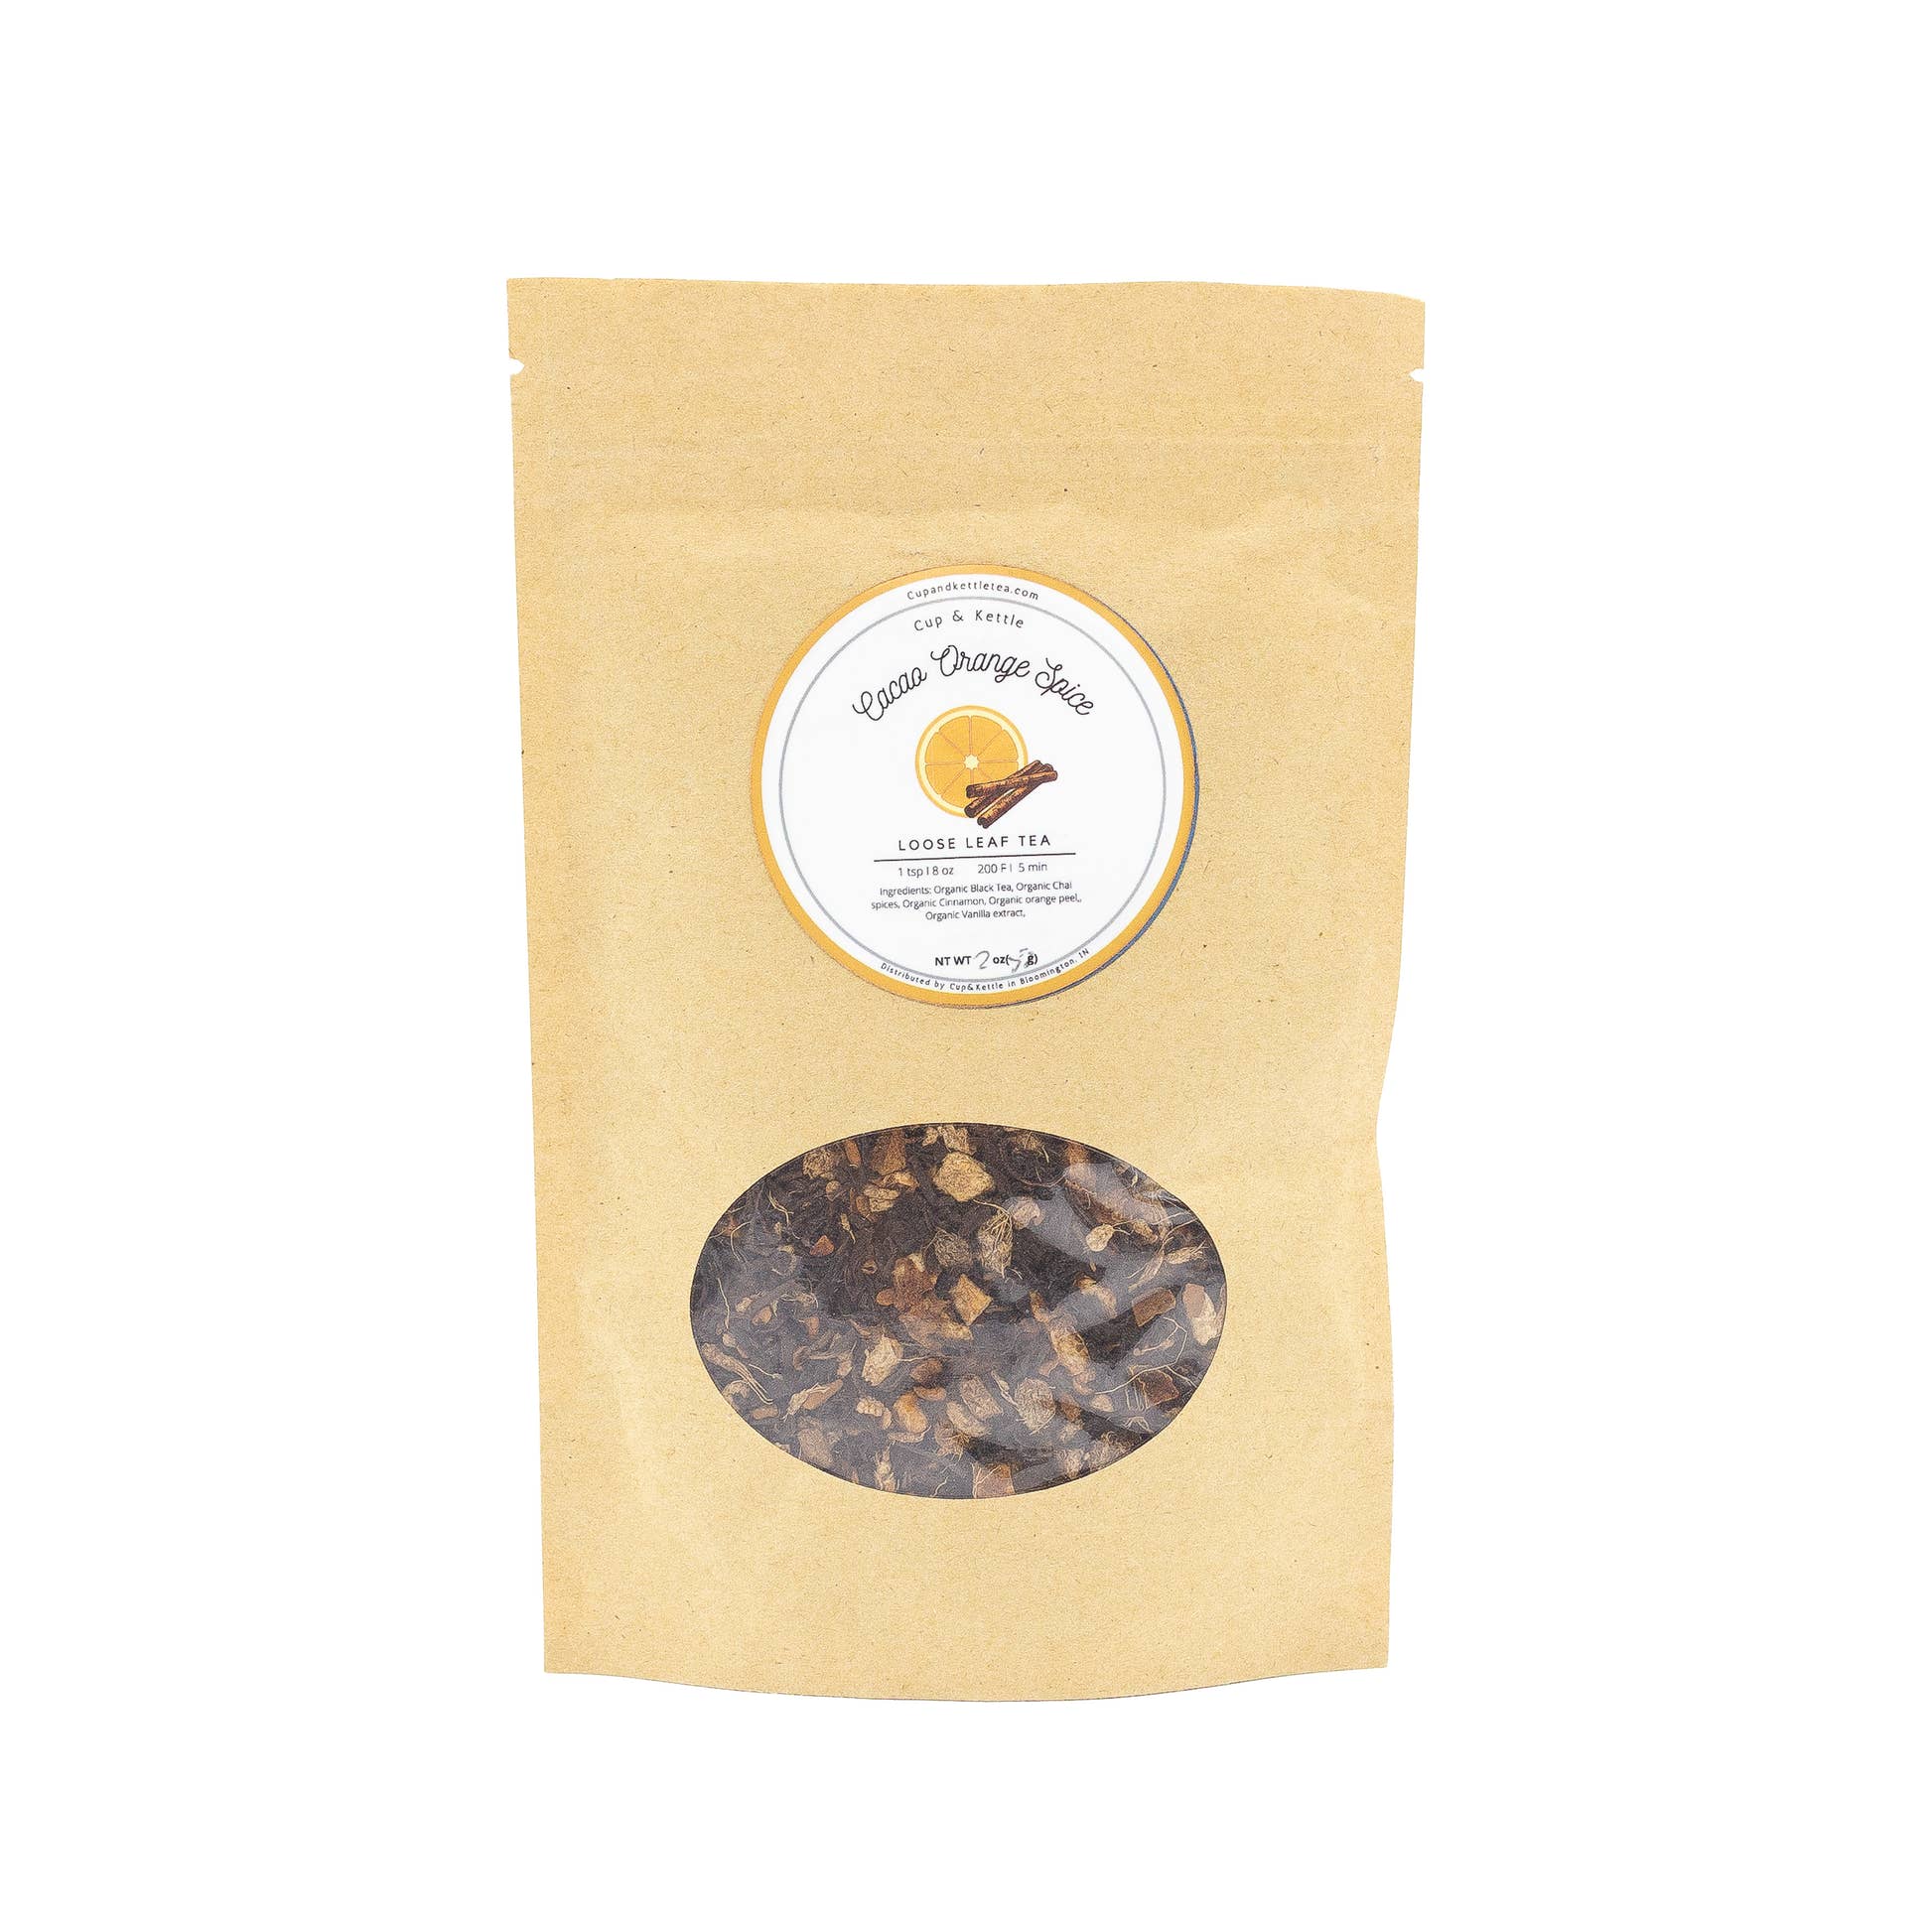 Cacao Orange Spice pouch with loose leaf black tea blend by Cup & Kettle